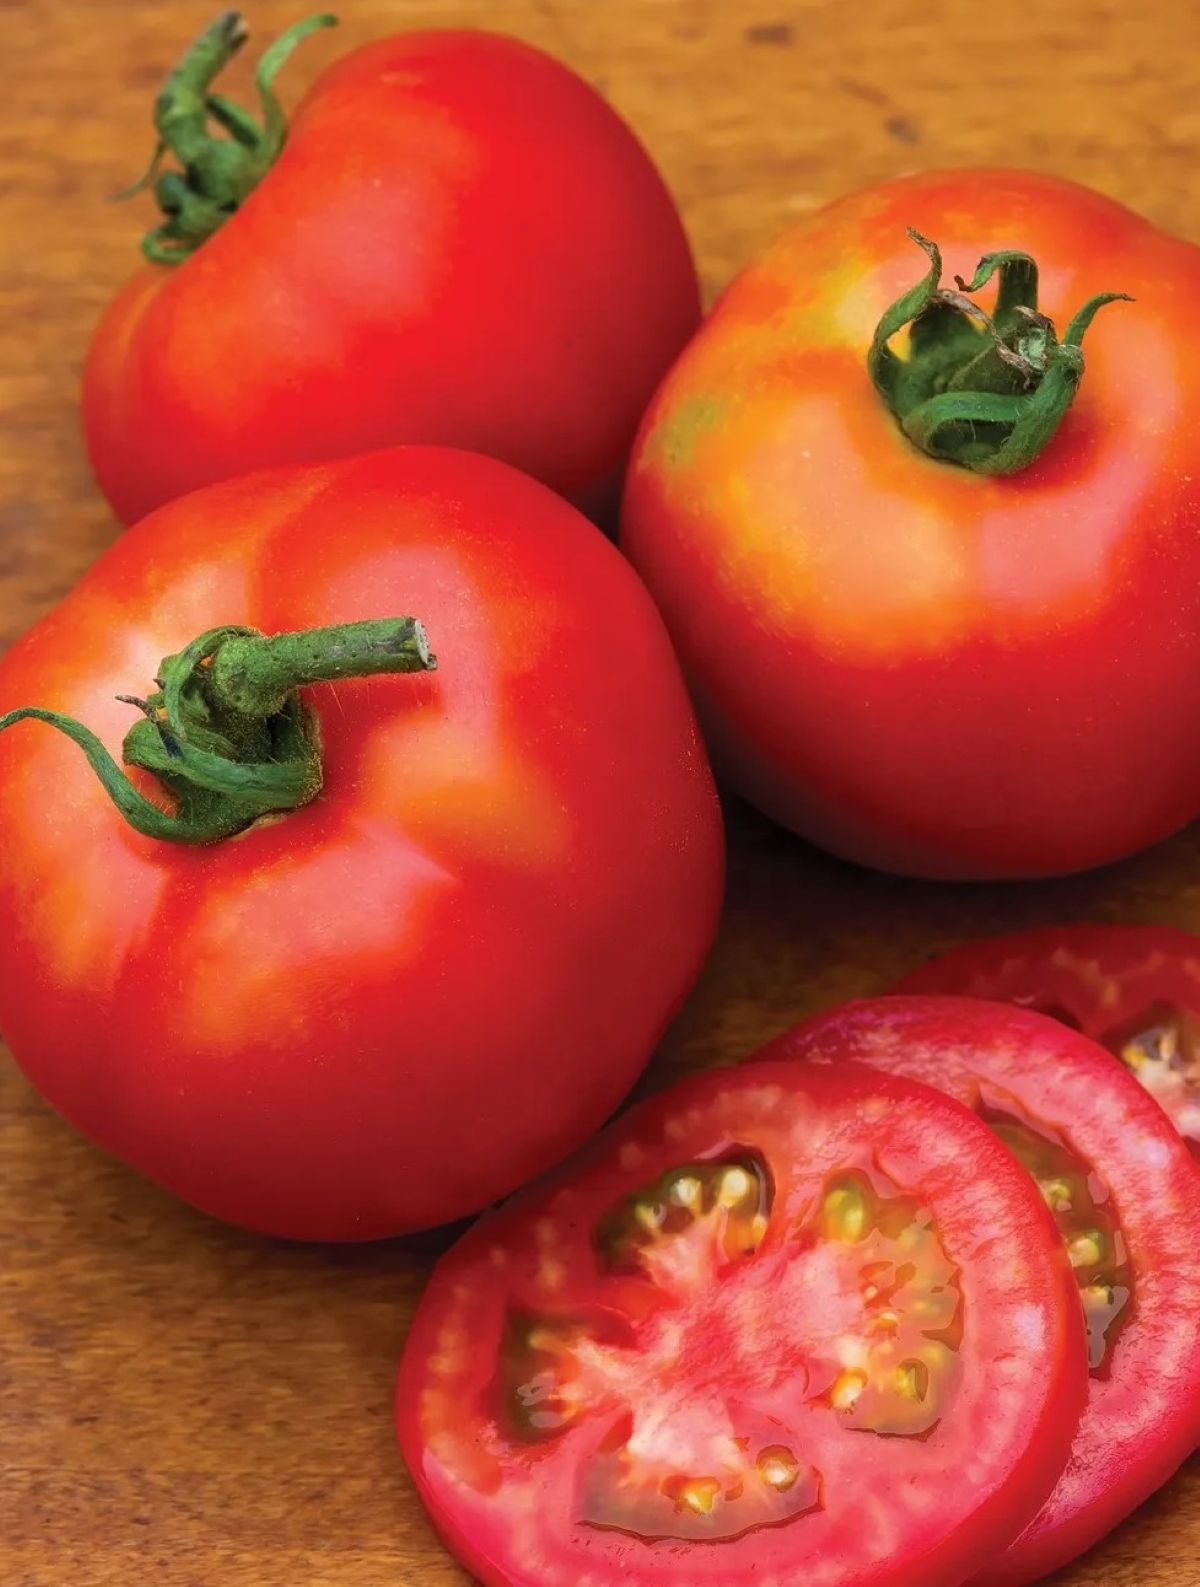 types of tomatoes - three red tomatoes and slices